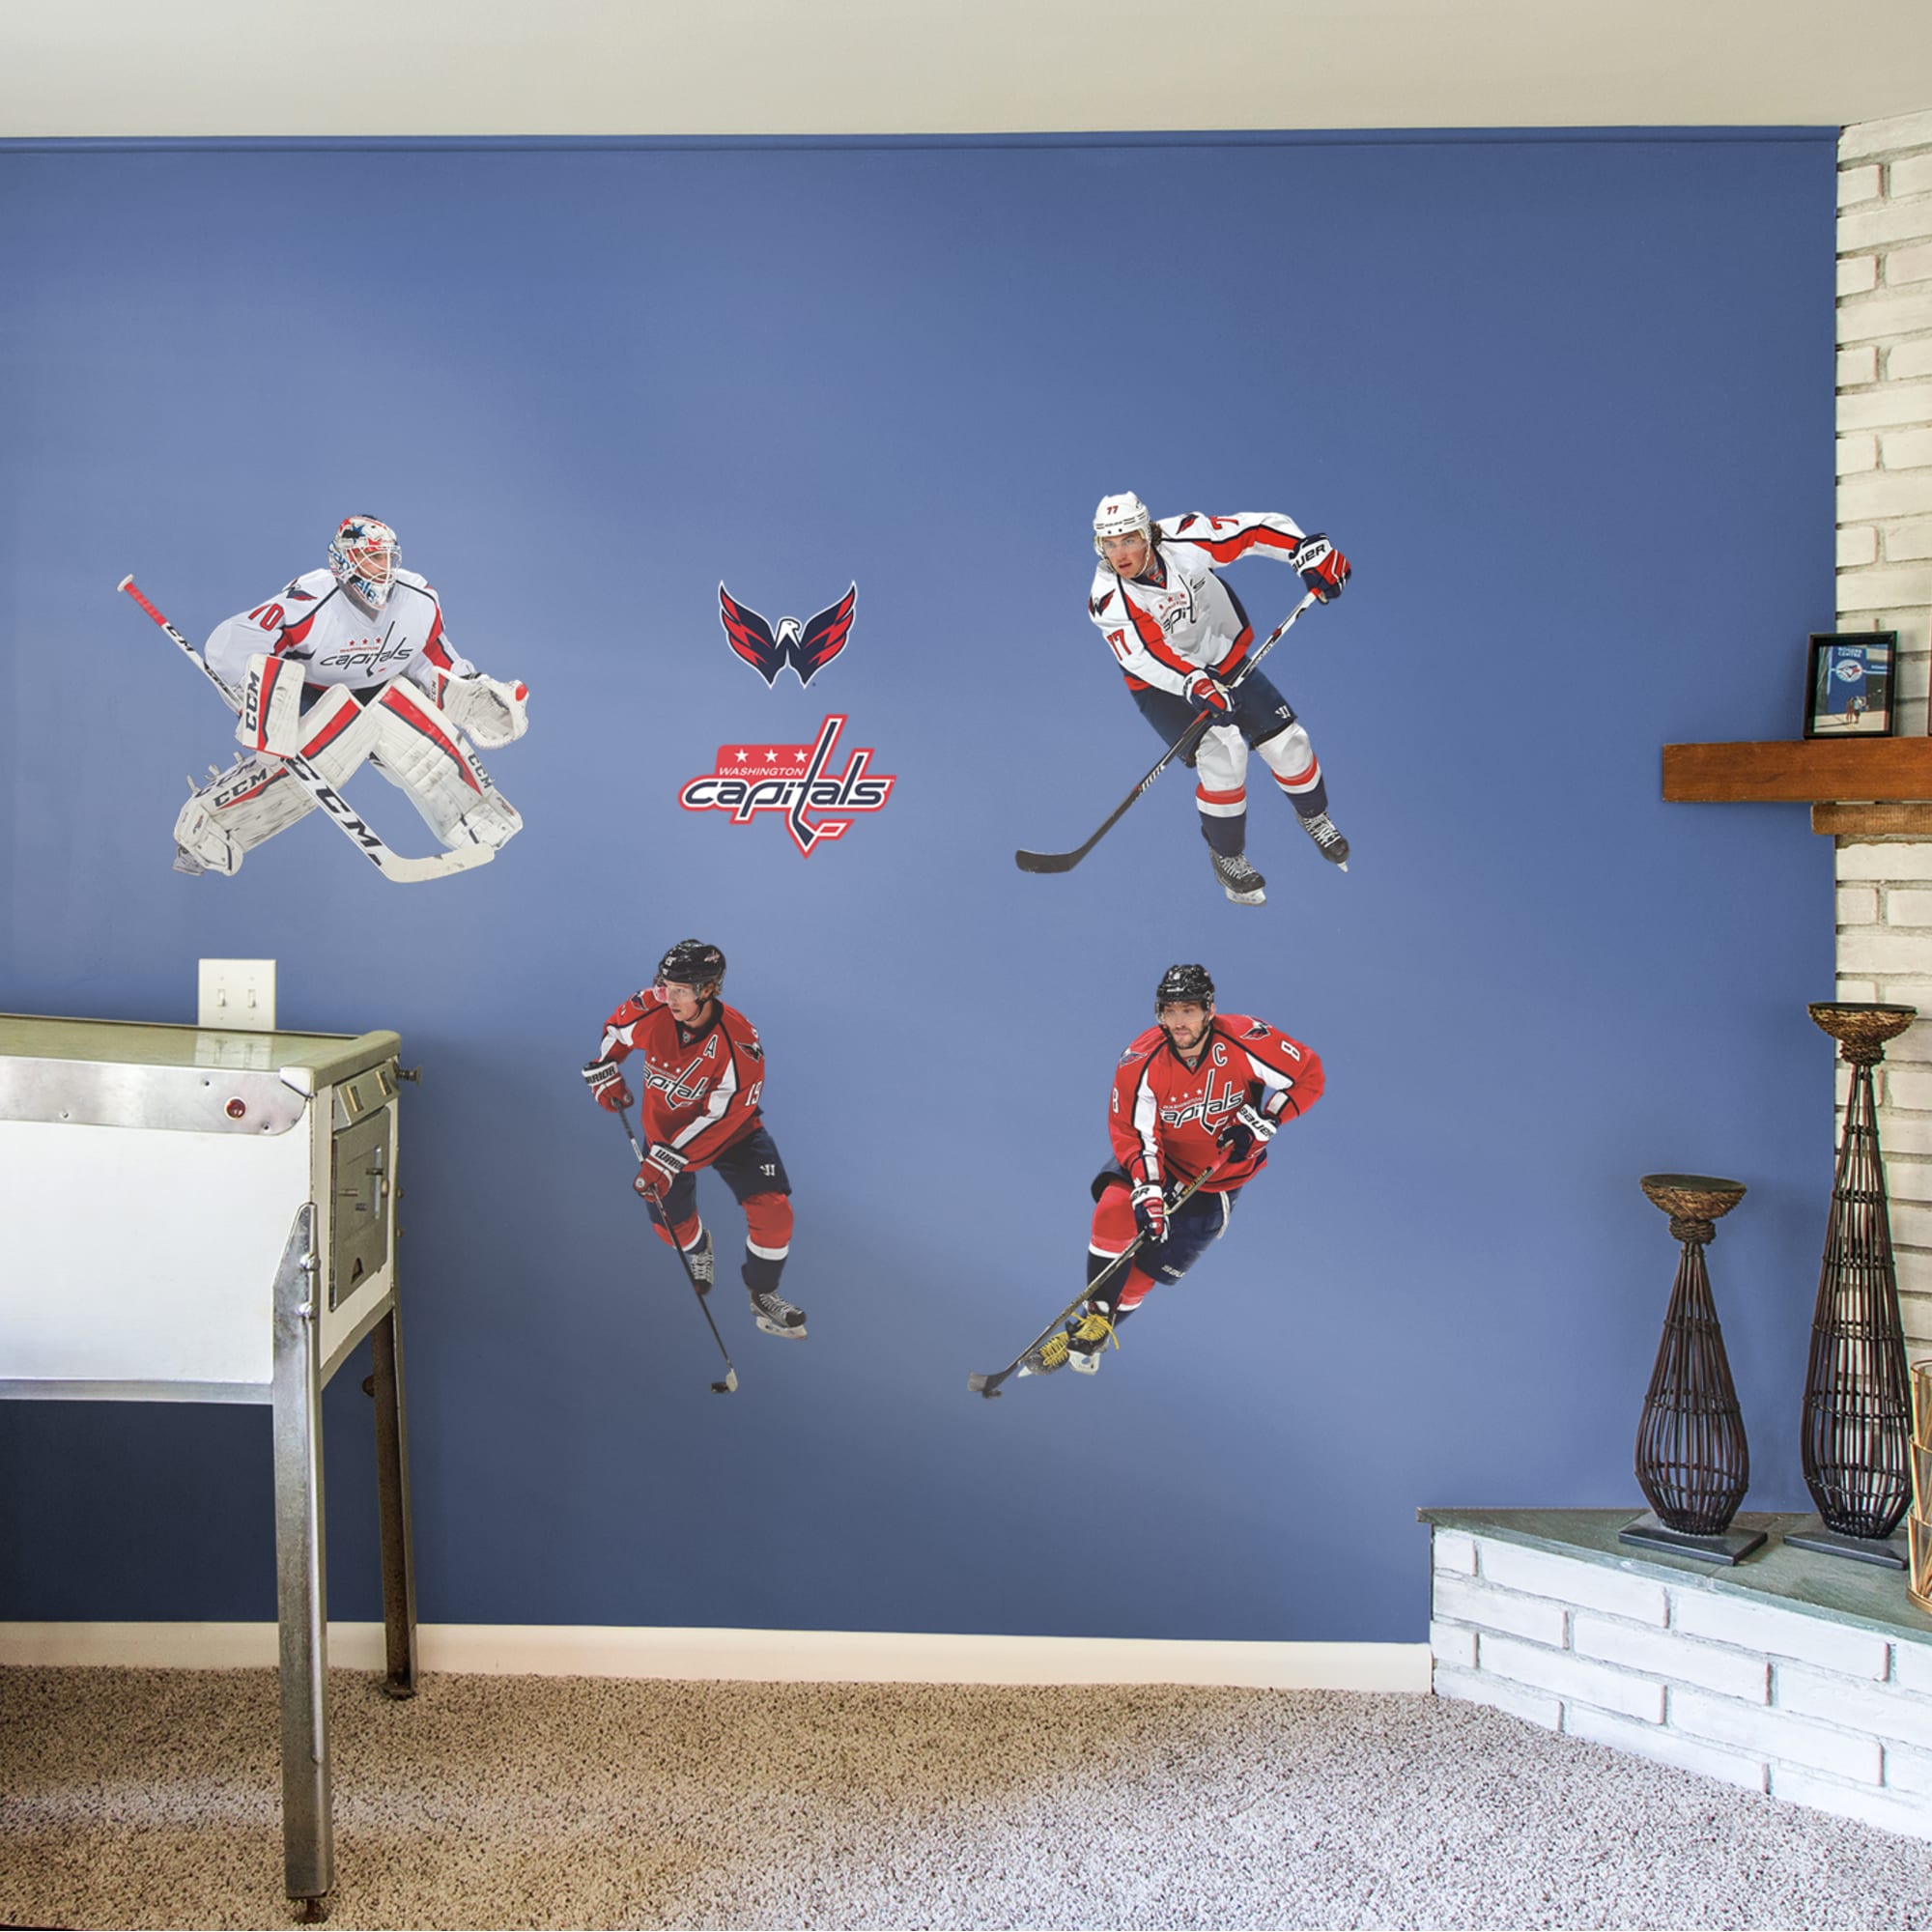 Washington Capitals: Power Pack - Officially Licensed NHL Removable Wall Decal 52.0"W x 39.5"H by Fathead | Vinyl